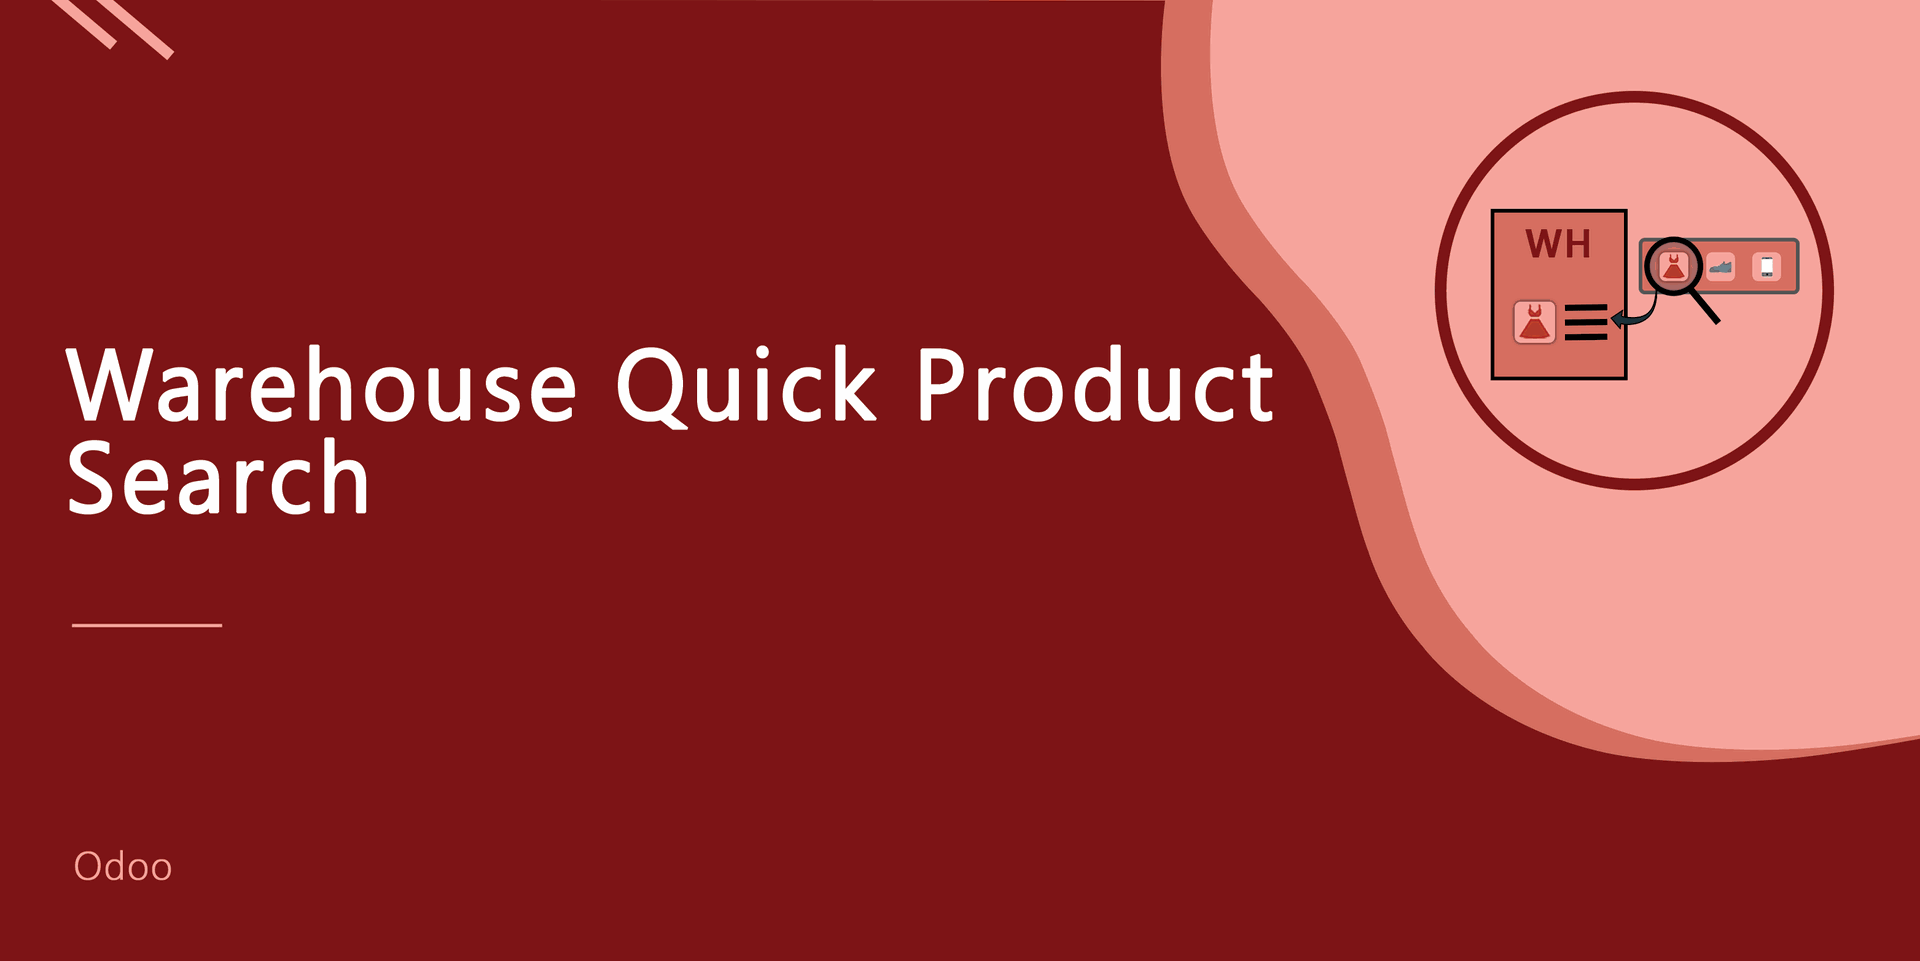 Warehouse Quick Product Search